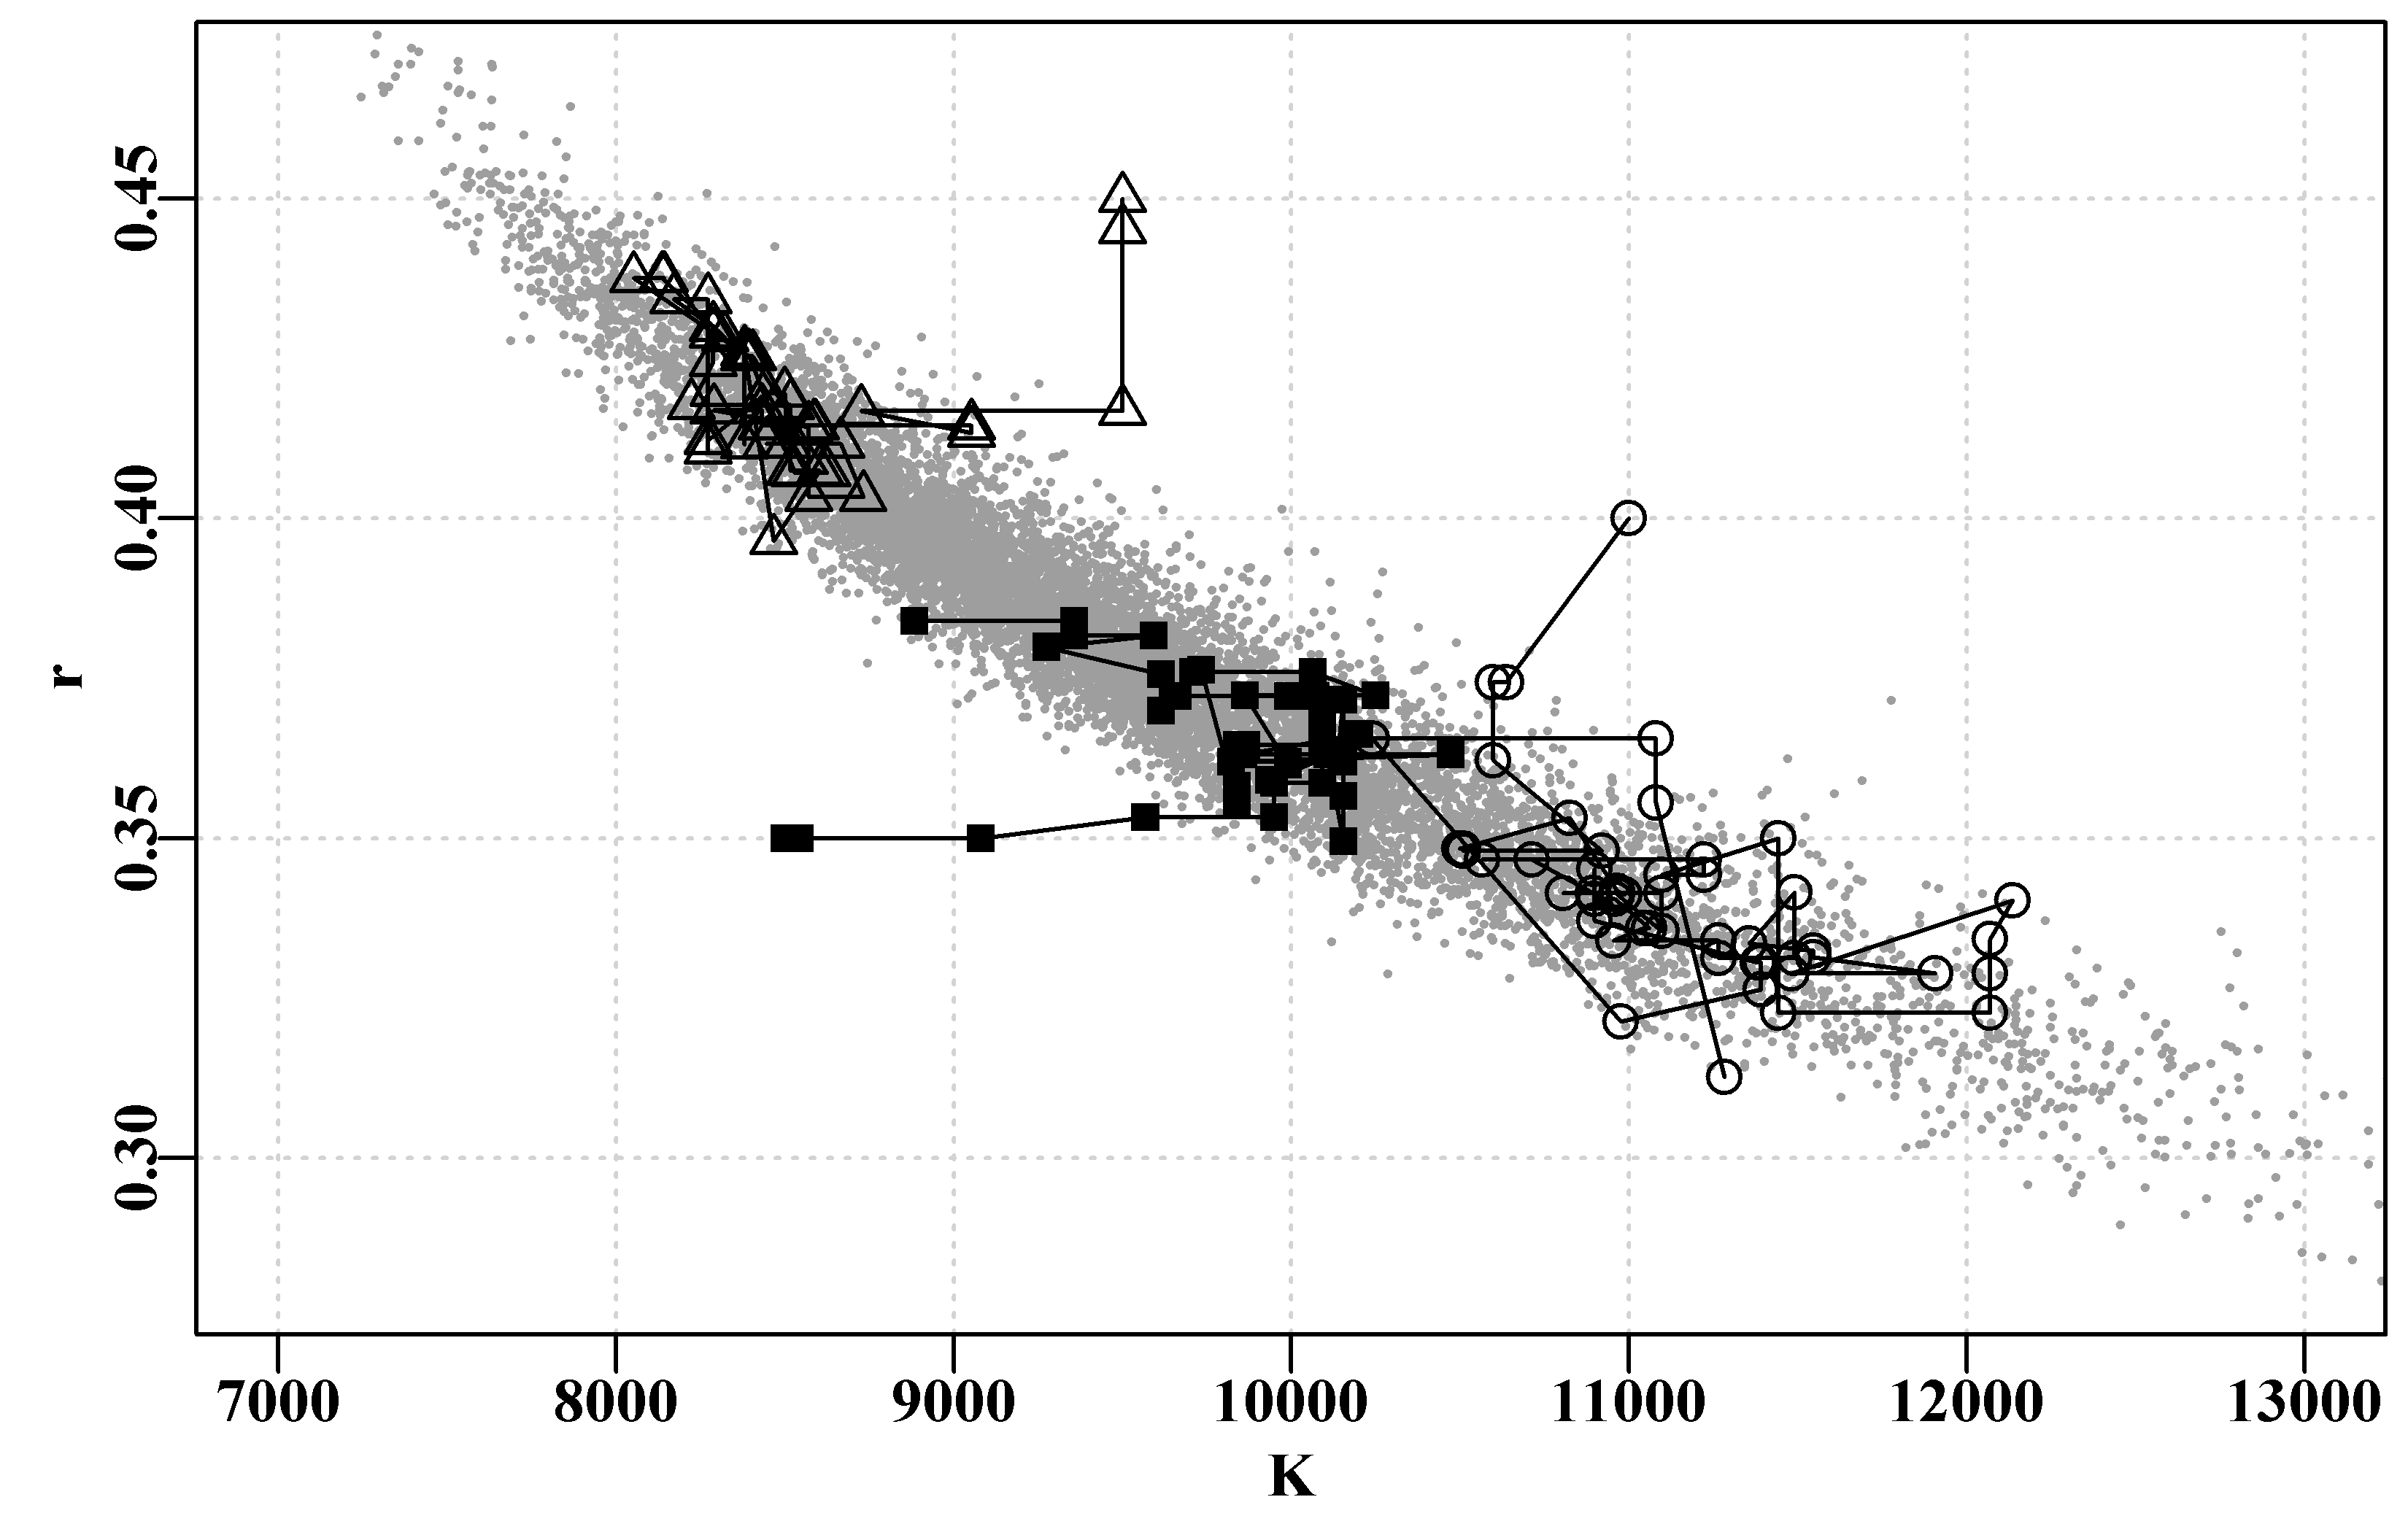 The first 75 points in three separate MCMC chains starting from different origins (triangles, squares, circles). No burn-in was set for these short chains so records begin from the starting points. The grey dots are 10000 points from a single fourth chain, with a 50 point burn-in and a thinning rate of four, giving an approximate idea of the stationary distribution towards which all chains should converge.